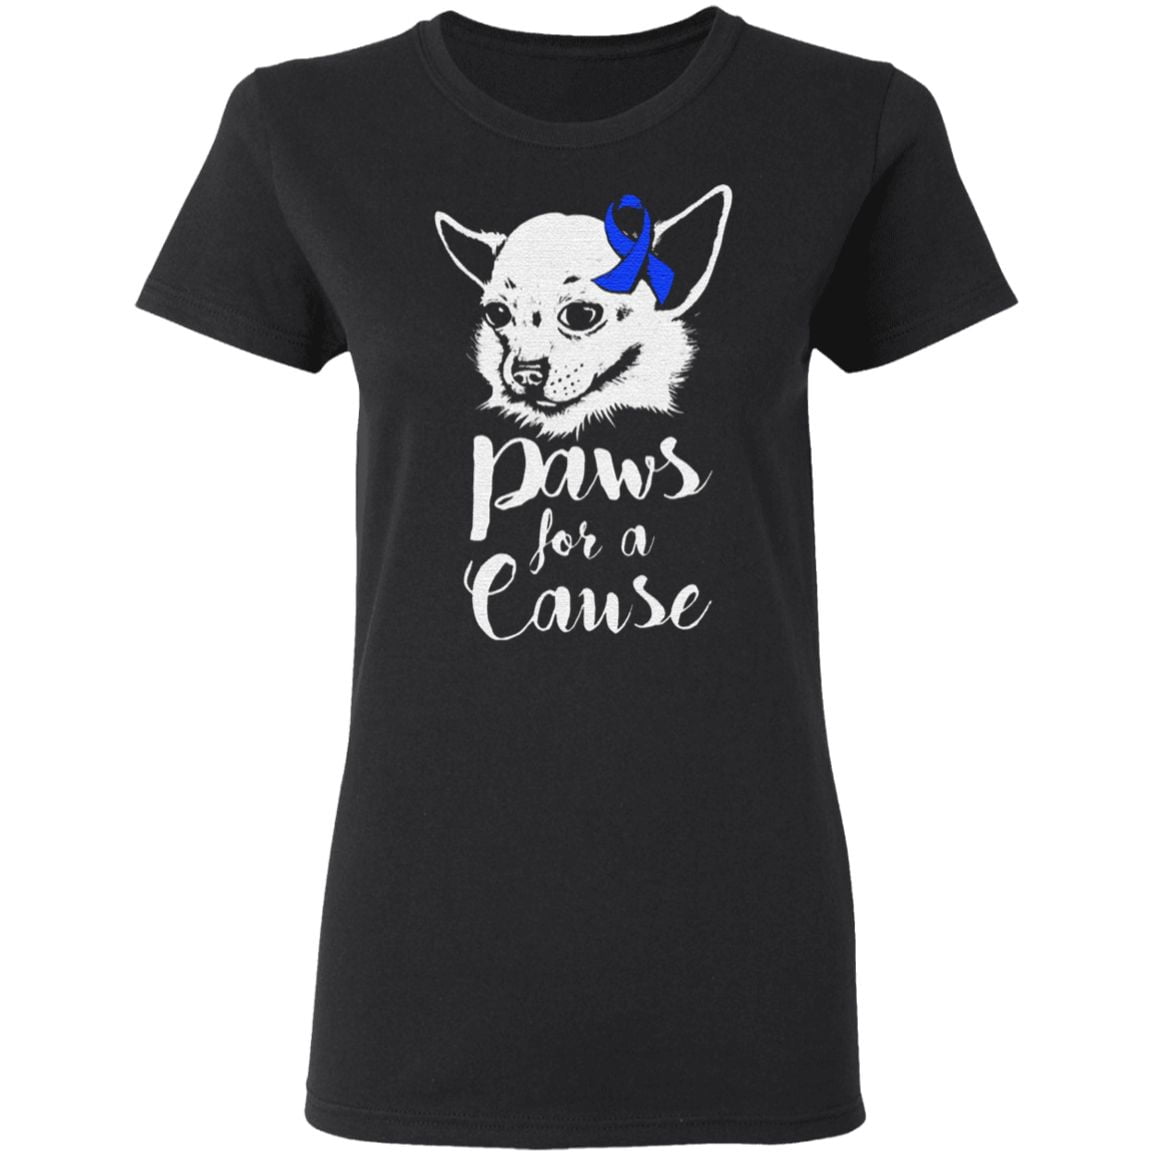 Paws For a Cause Child Abuse TShirt